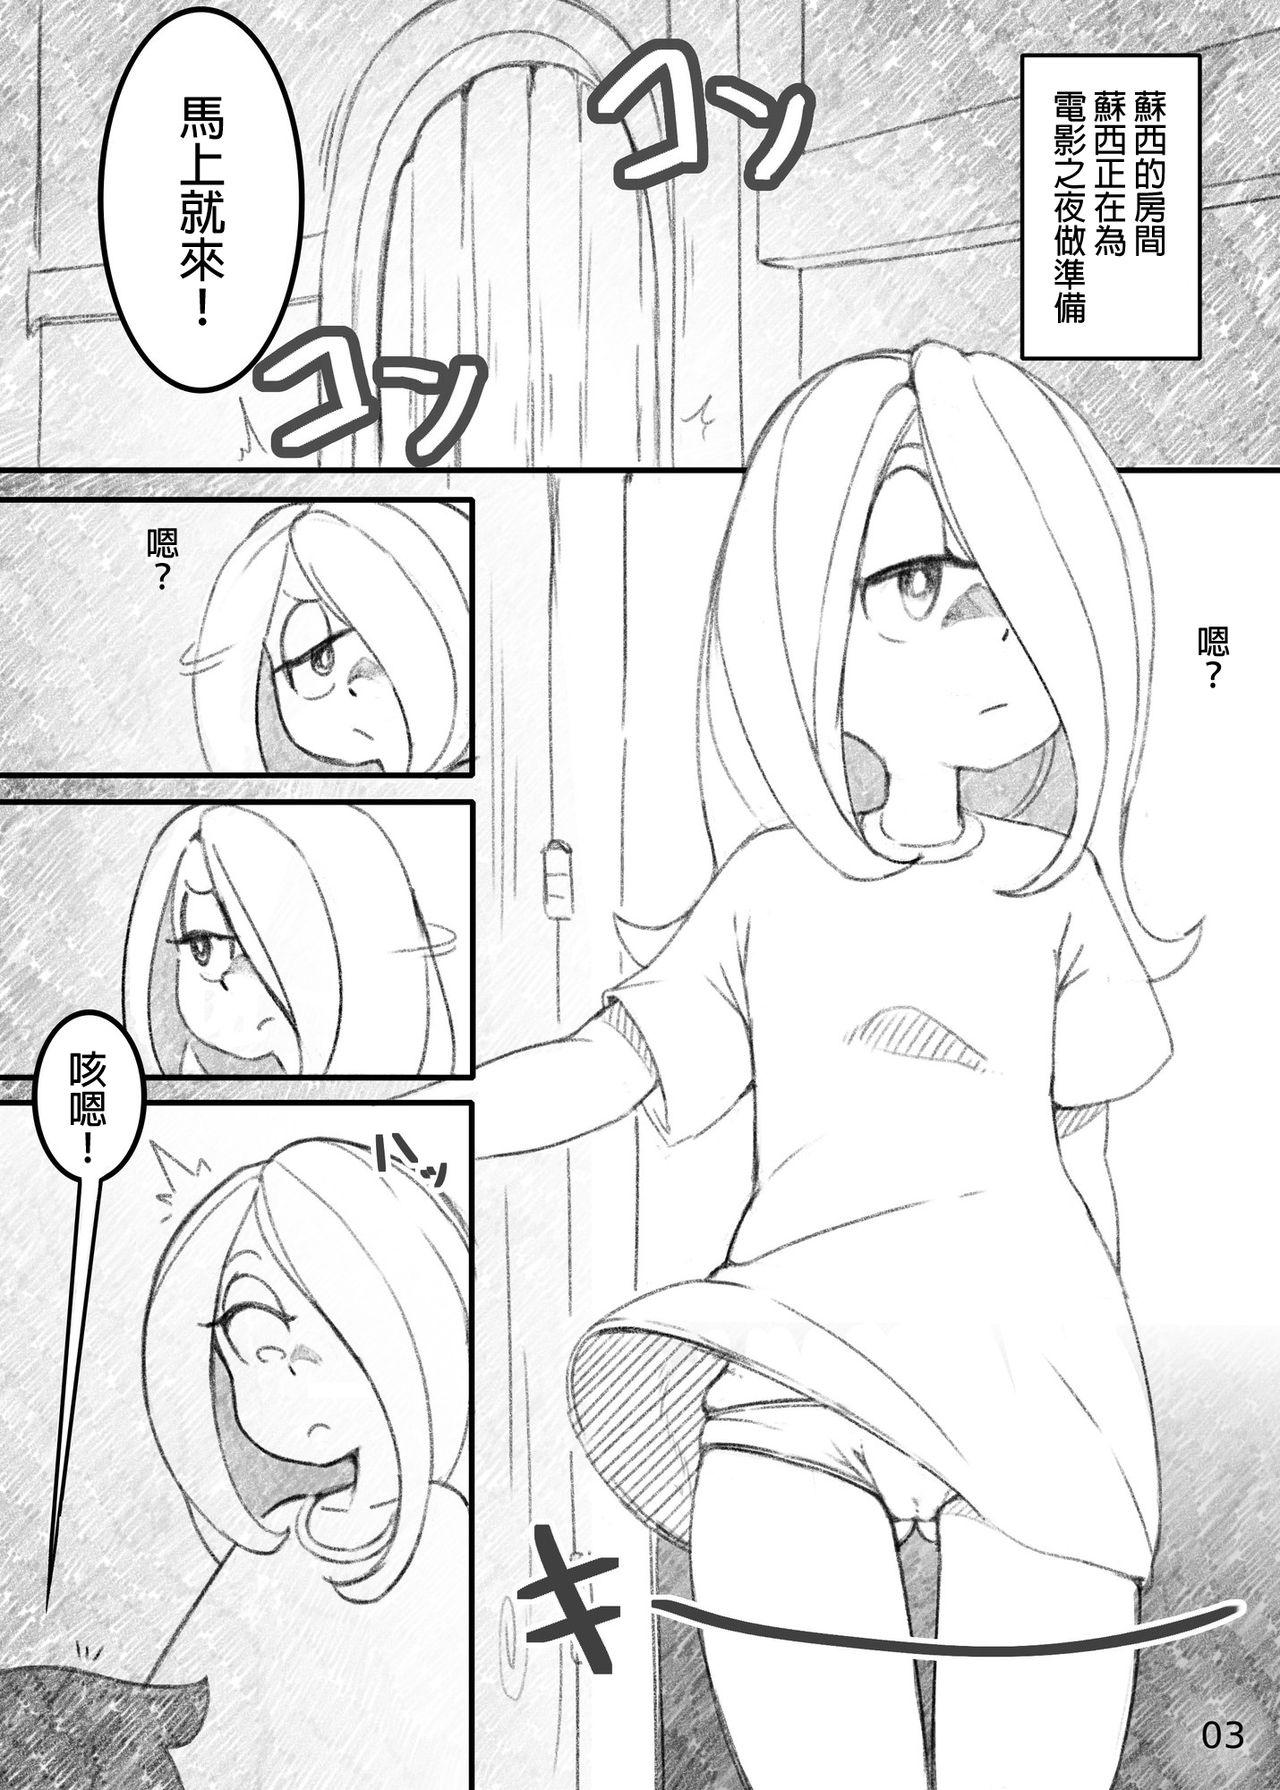 Bizarre Movie Night - Little witch academia Fucking - Page 3